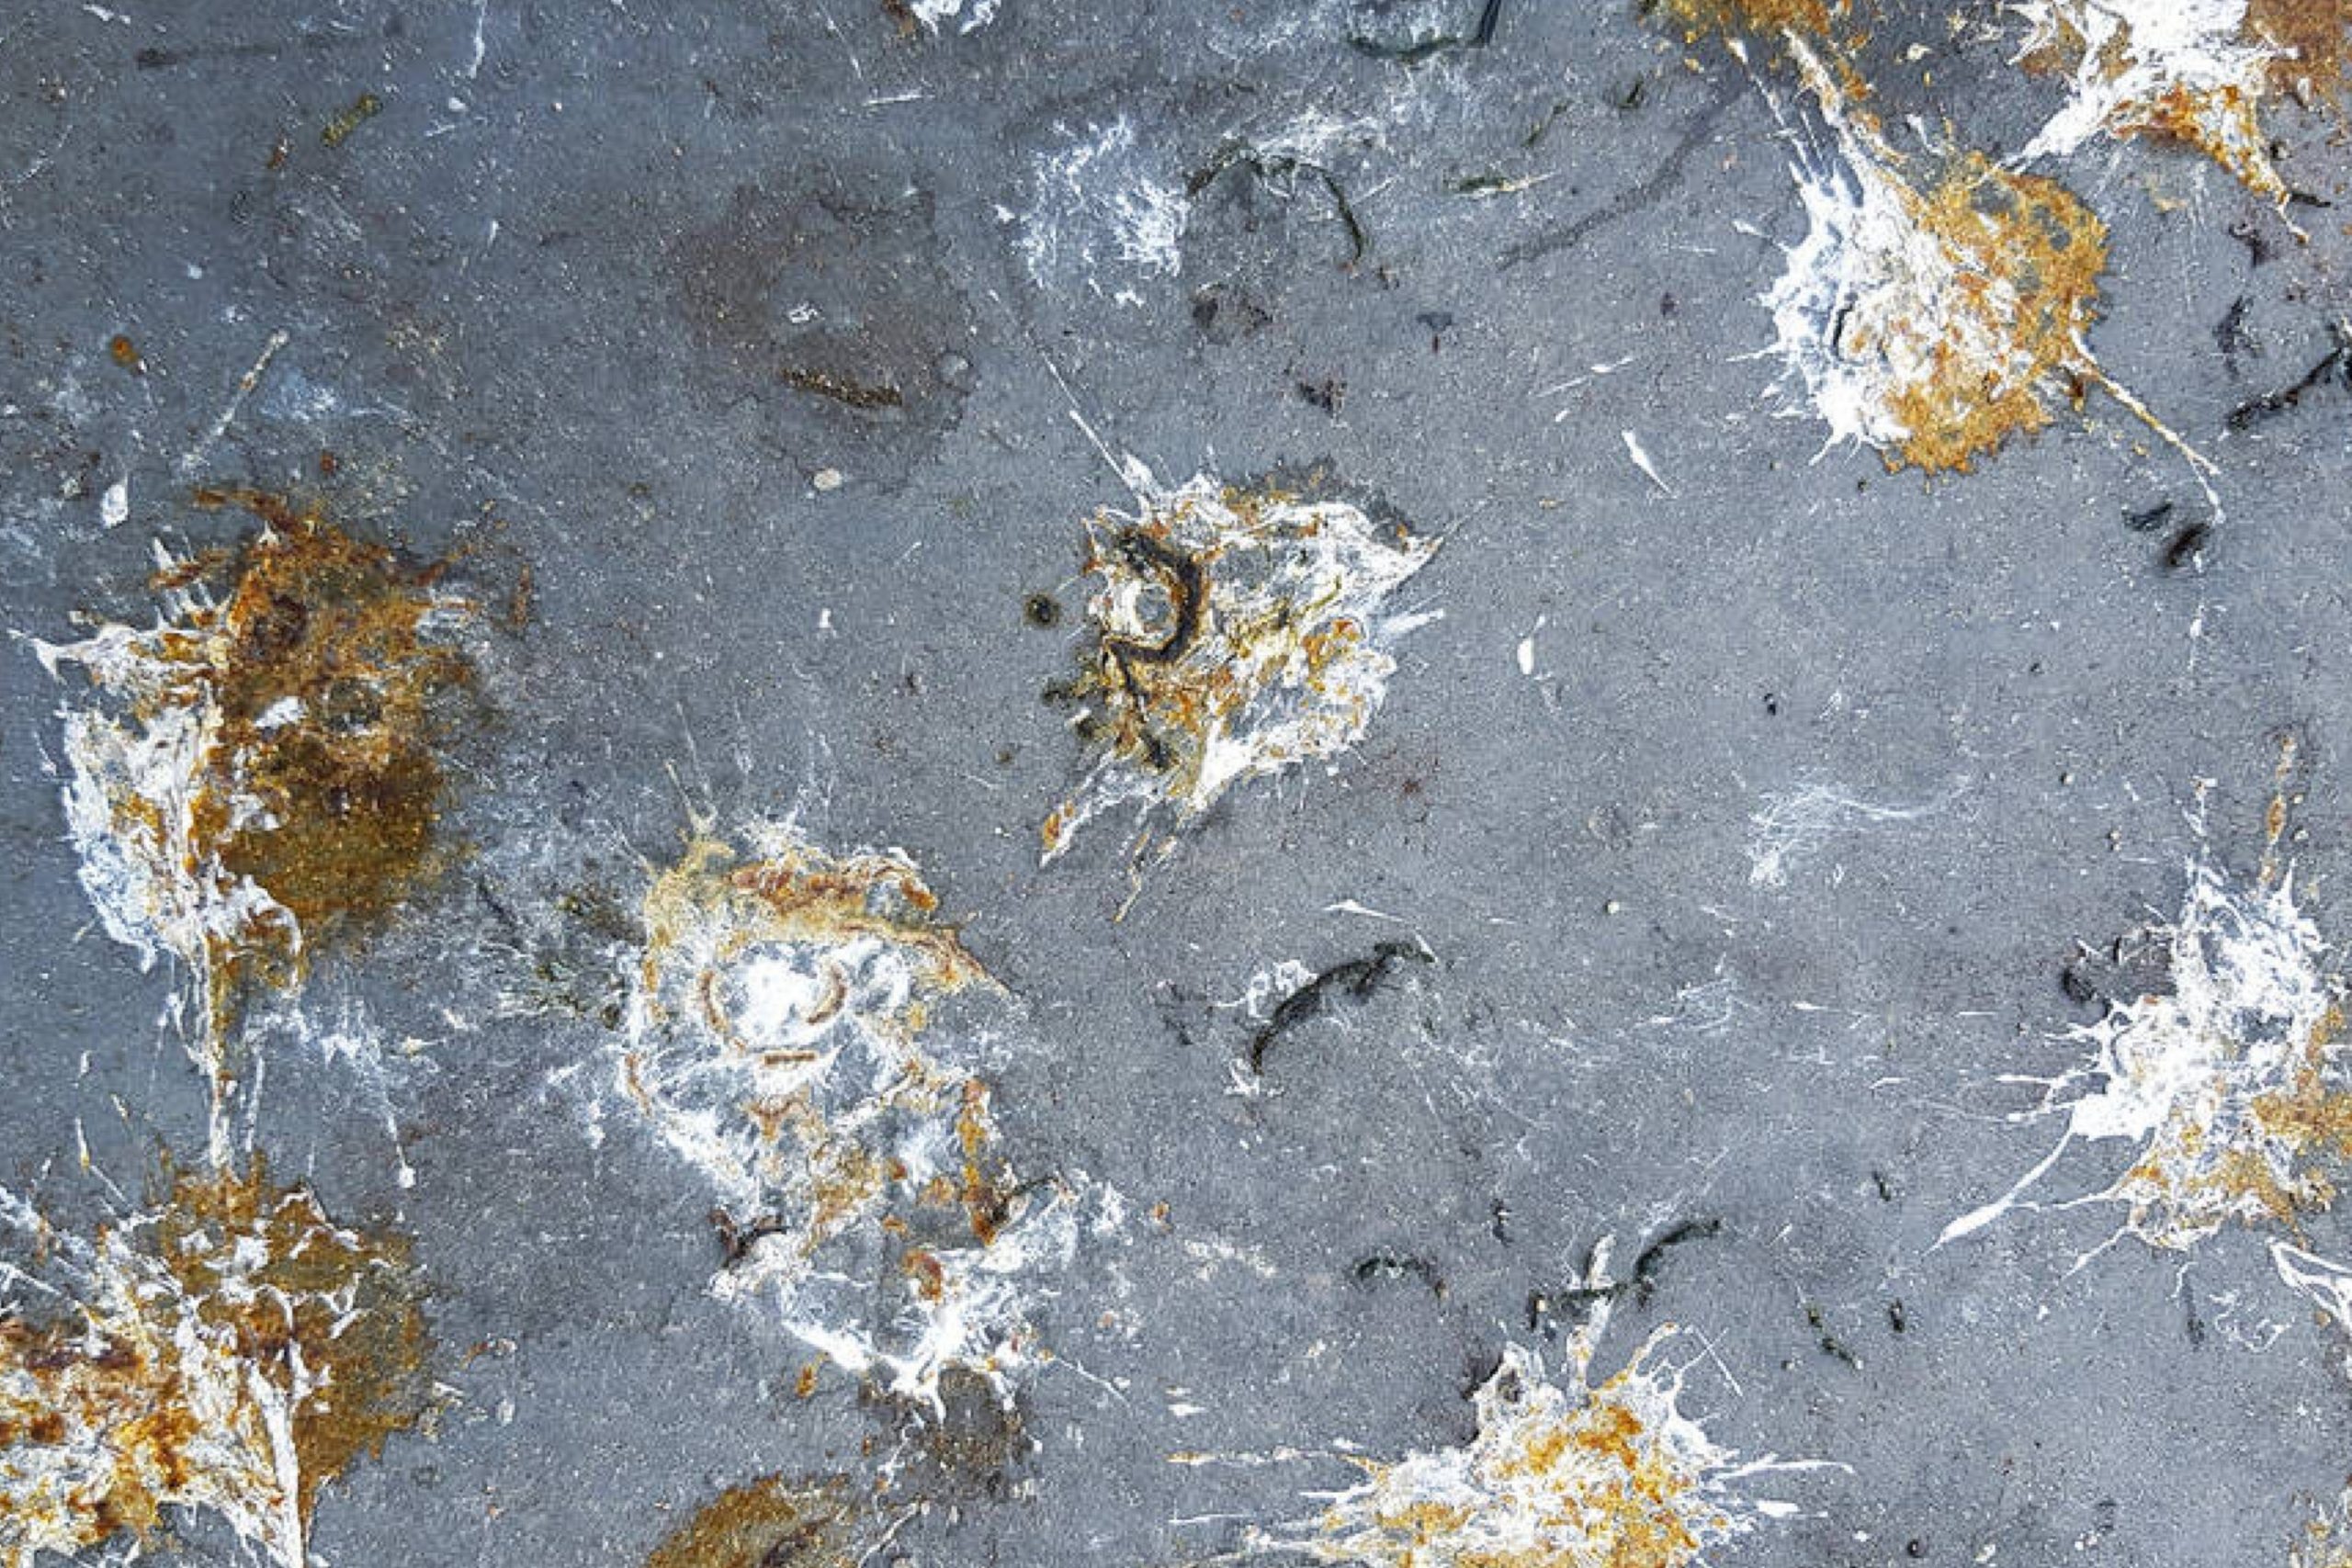 How to Remove Bird Poop From Concrete